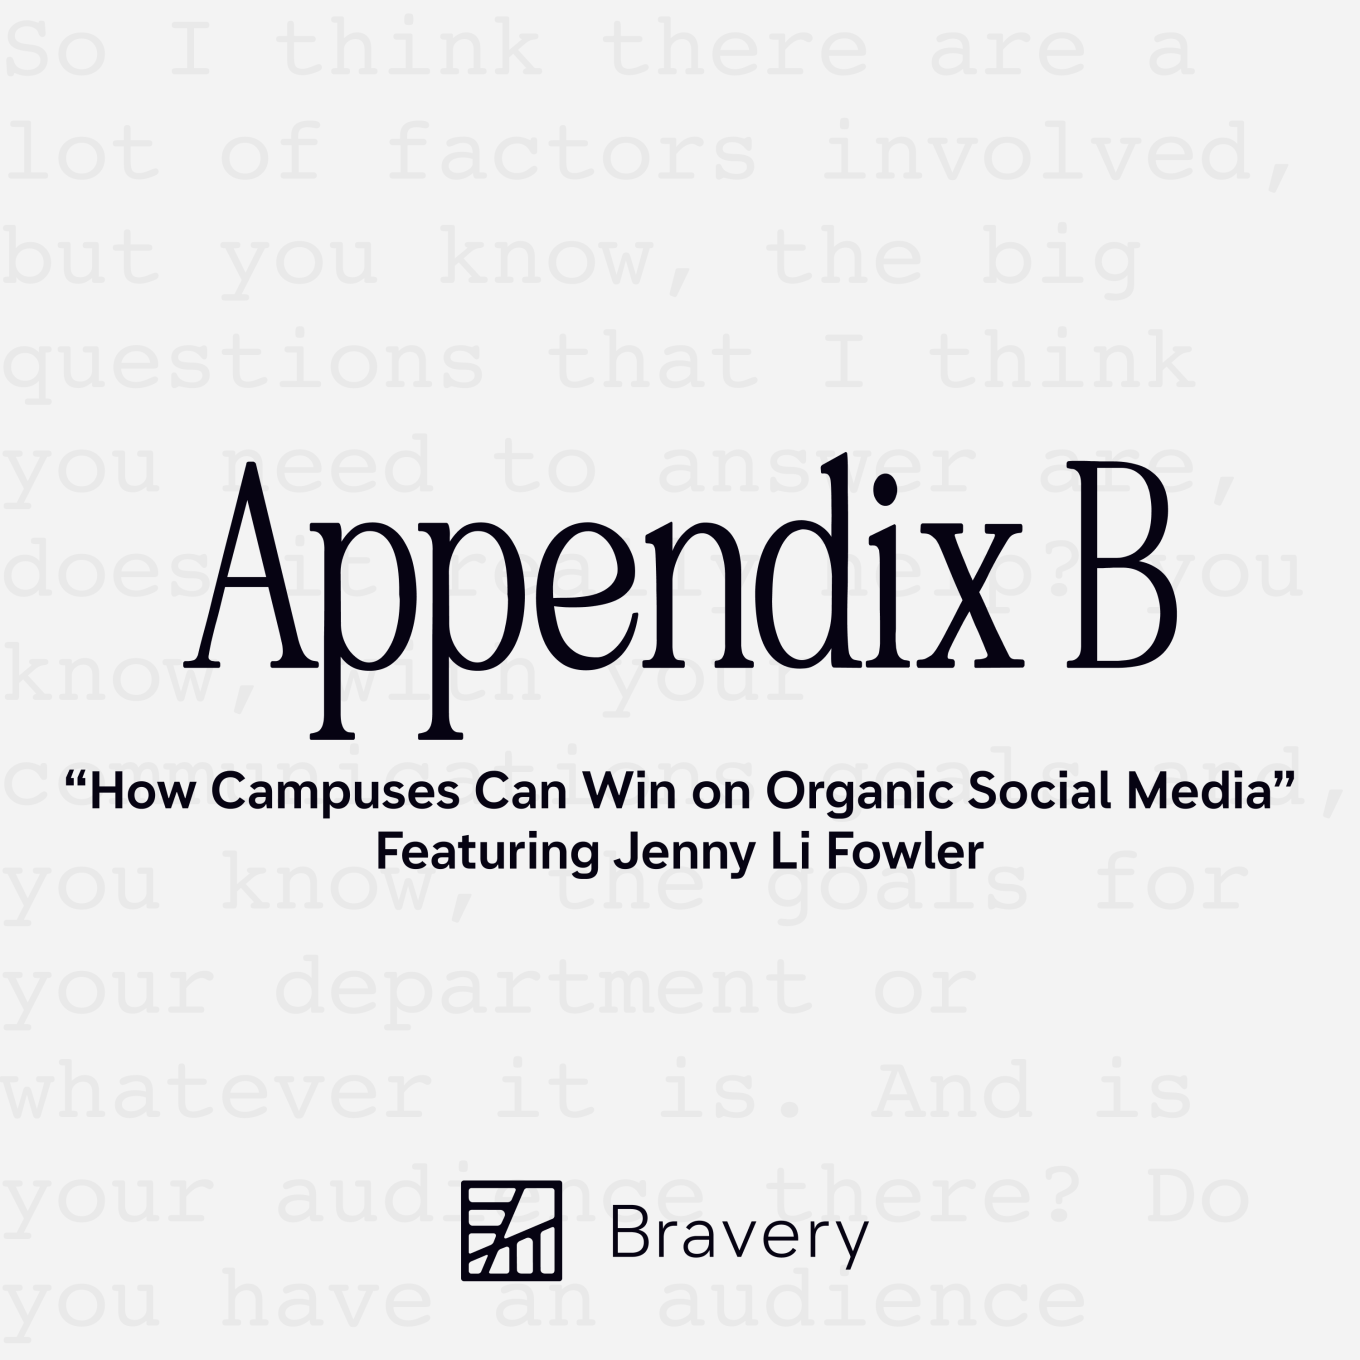 Appendix B Episode 28, text is present that reads, "How Campuses Can Win on Organic Social Media: featuring Jenny Li Fowler"